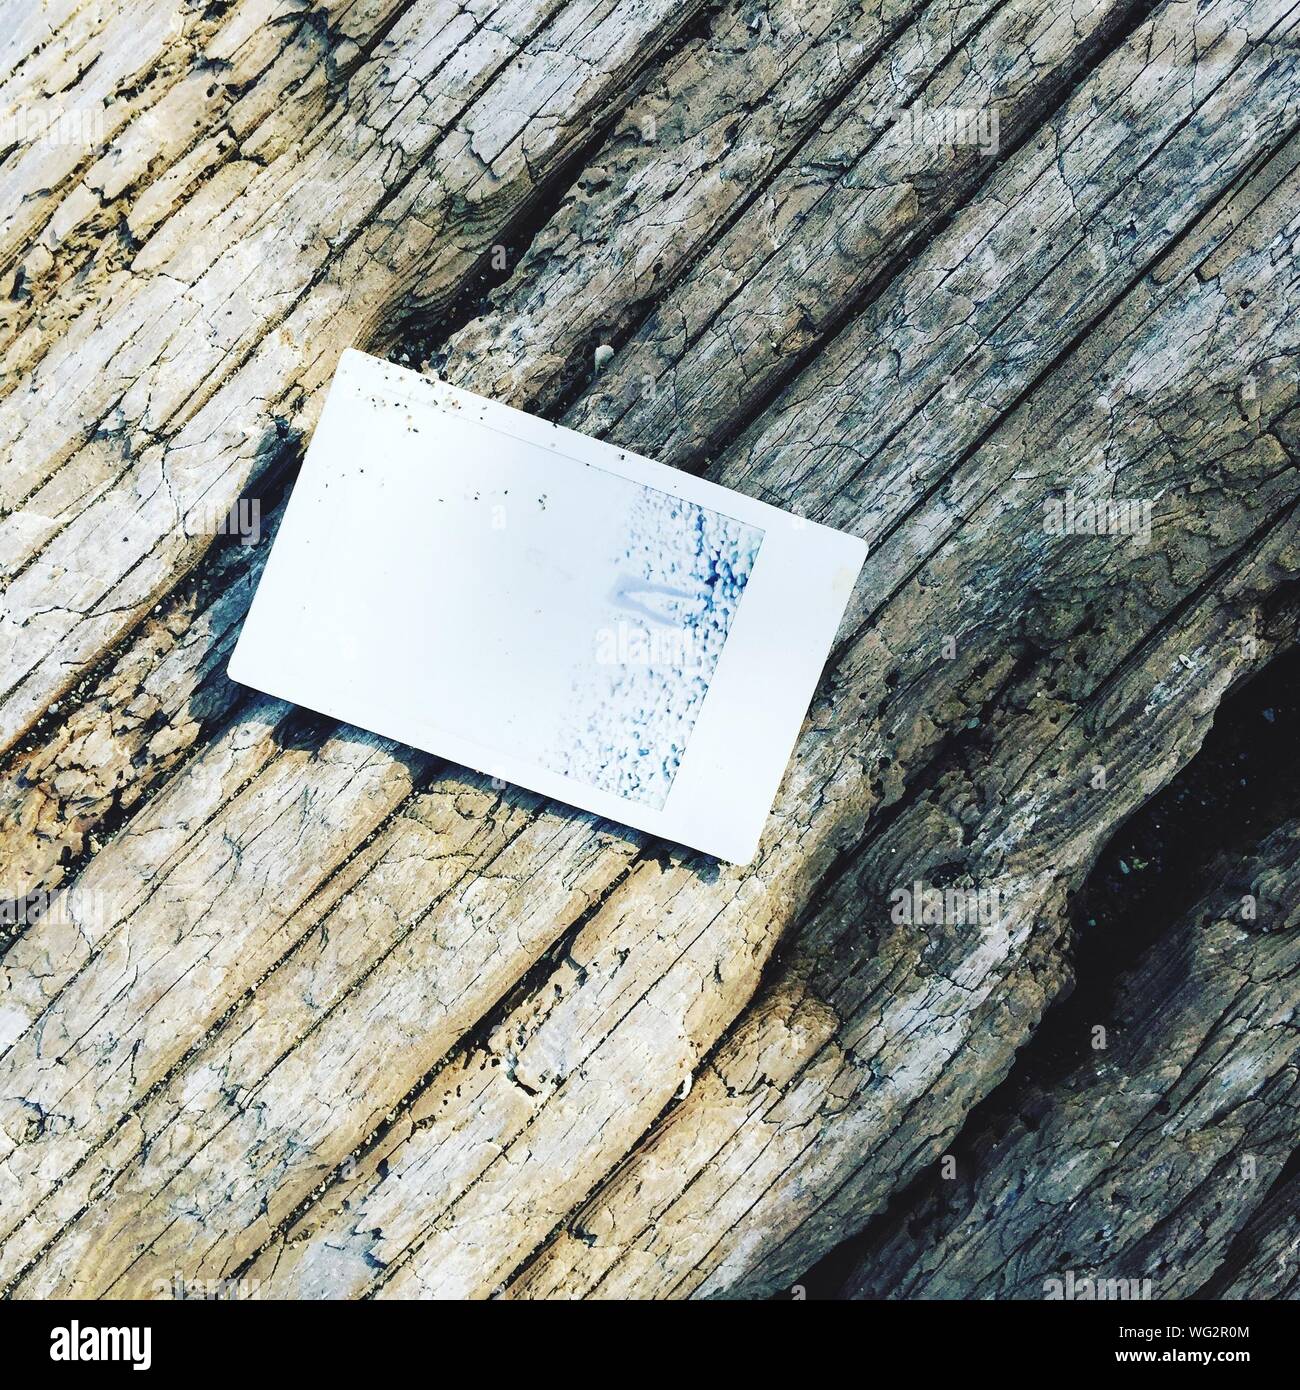 High Angle View Of Instant Photo On Driftwood Stock Photo